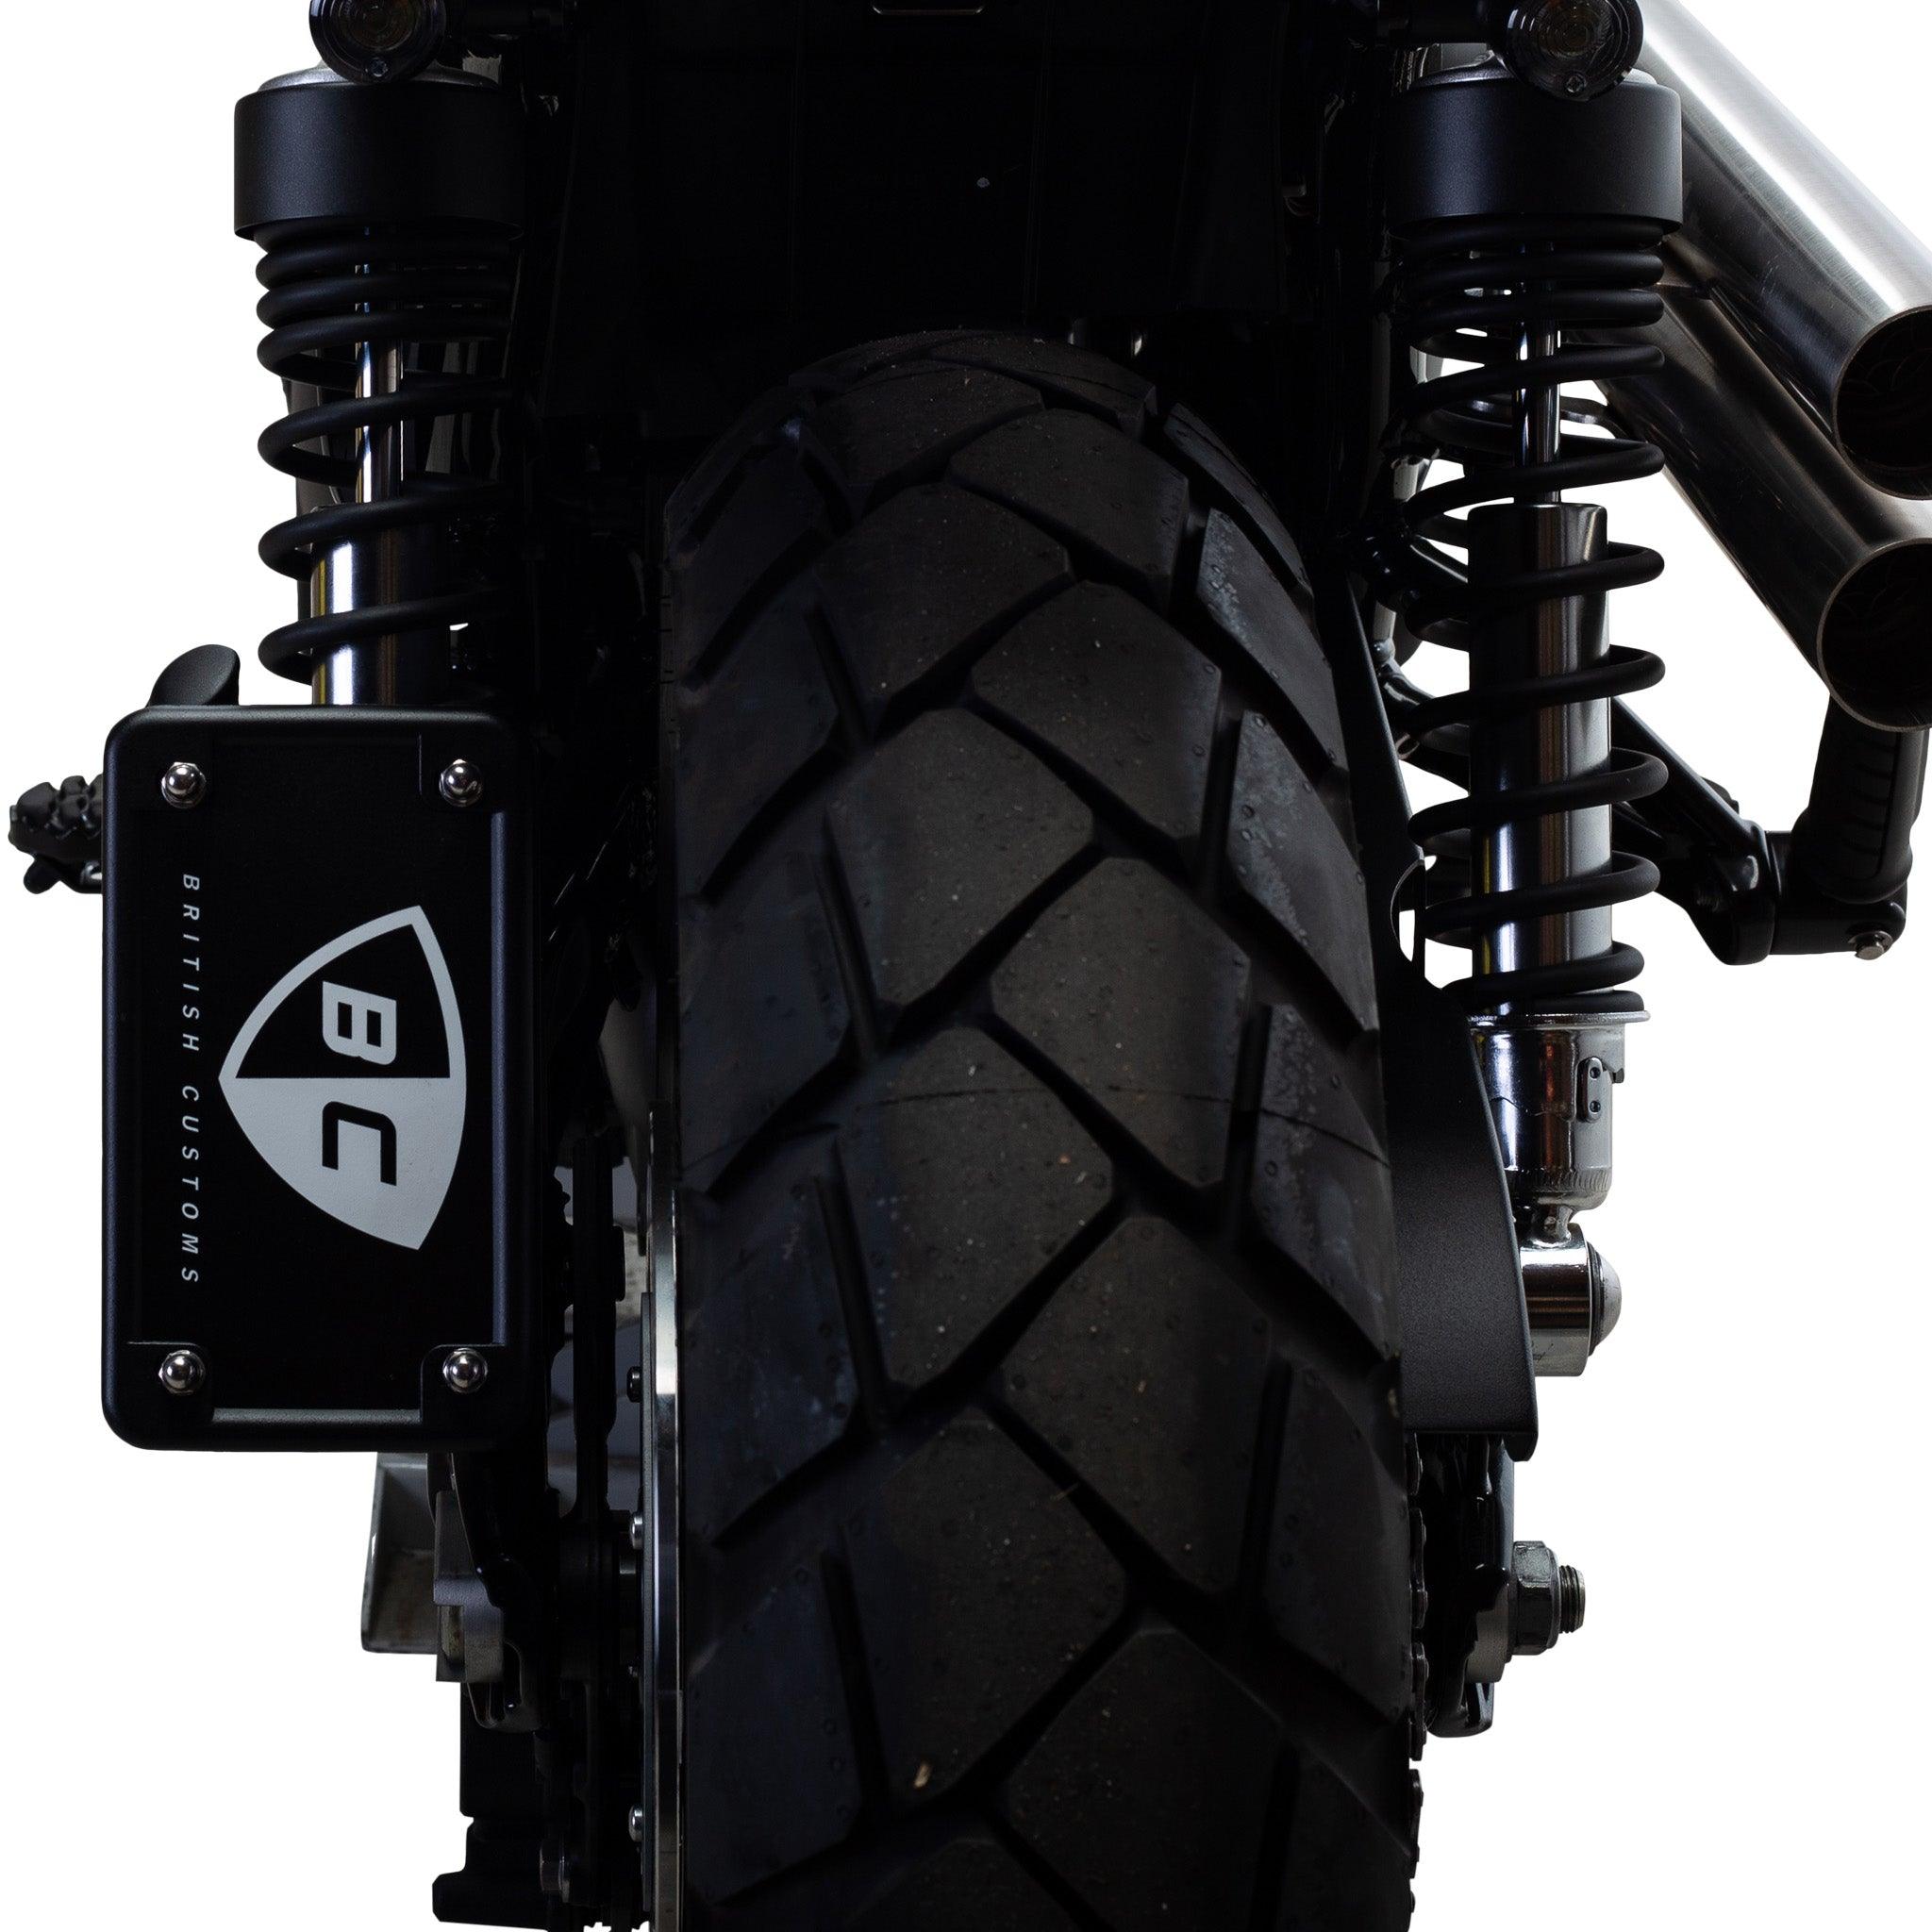 High-Quality 8mm Shock Mount License Plate for Triumph Motorcycles - British Customs